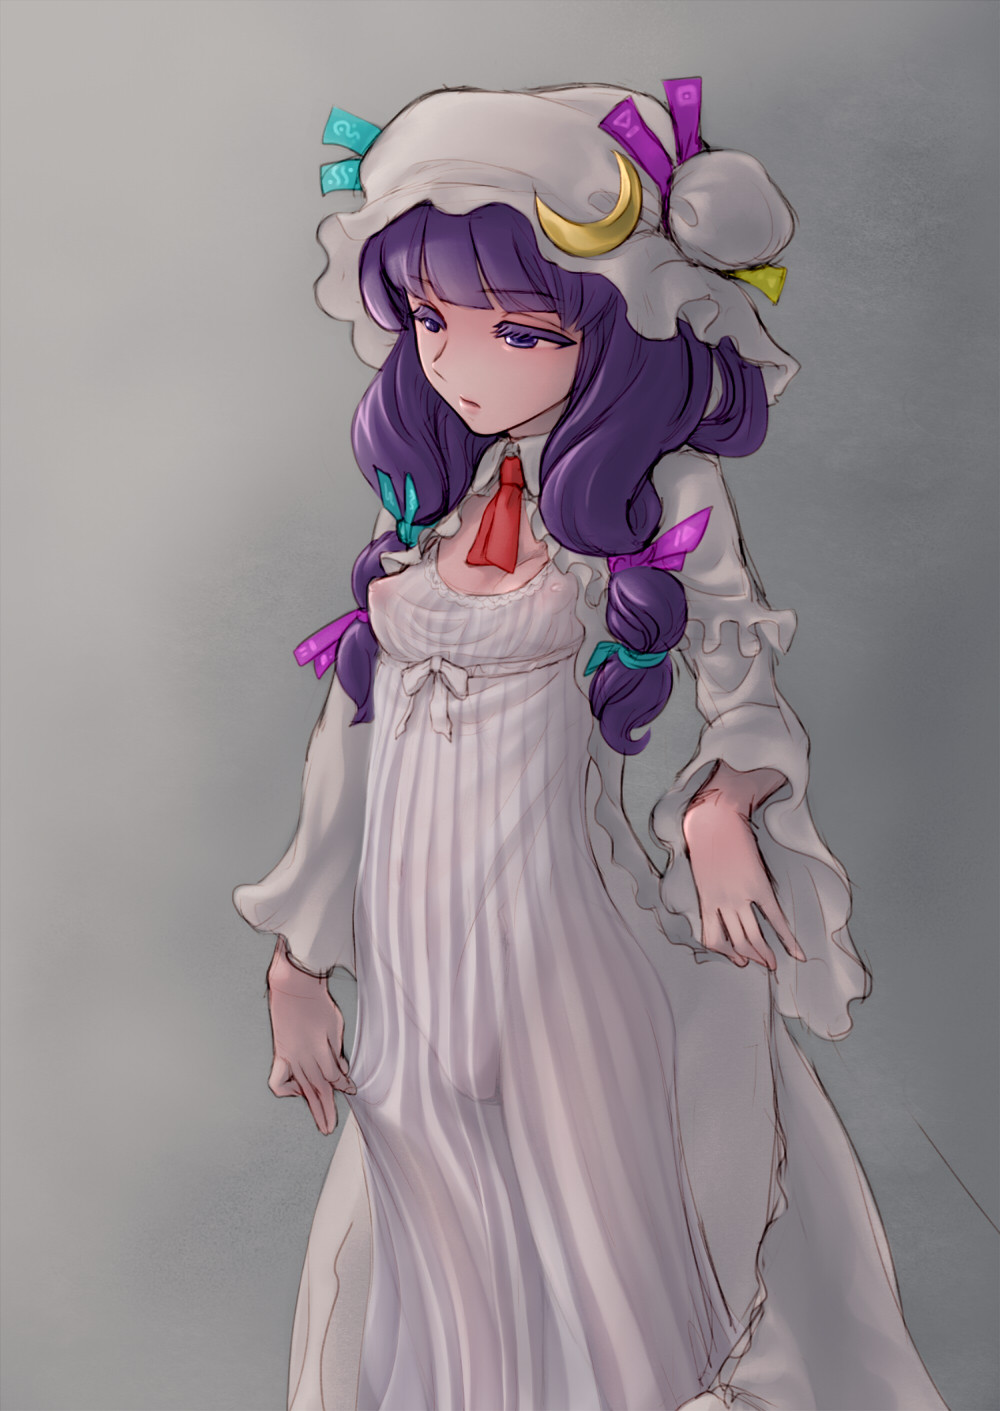 Patchouli by Akai HanaI can however post petite depictions of characters over 100